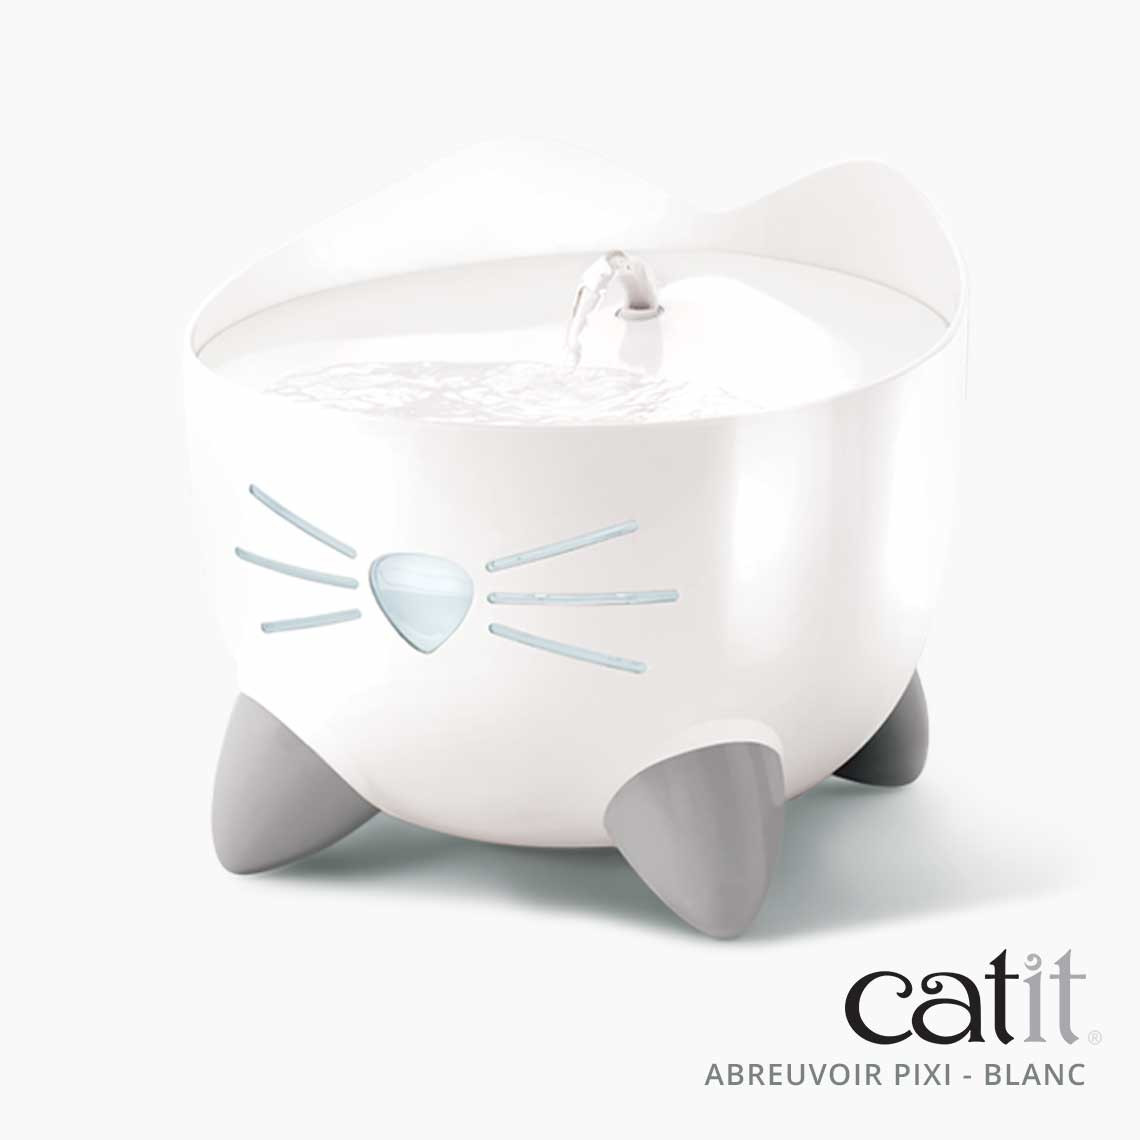 fontaine eau chat, fontaine eau chat Suppliers and Manufacturers